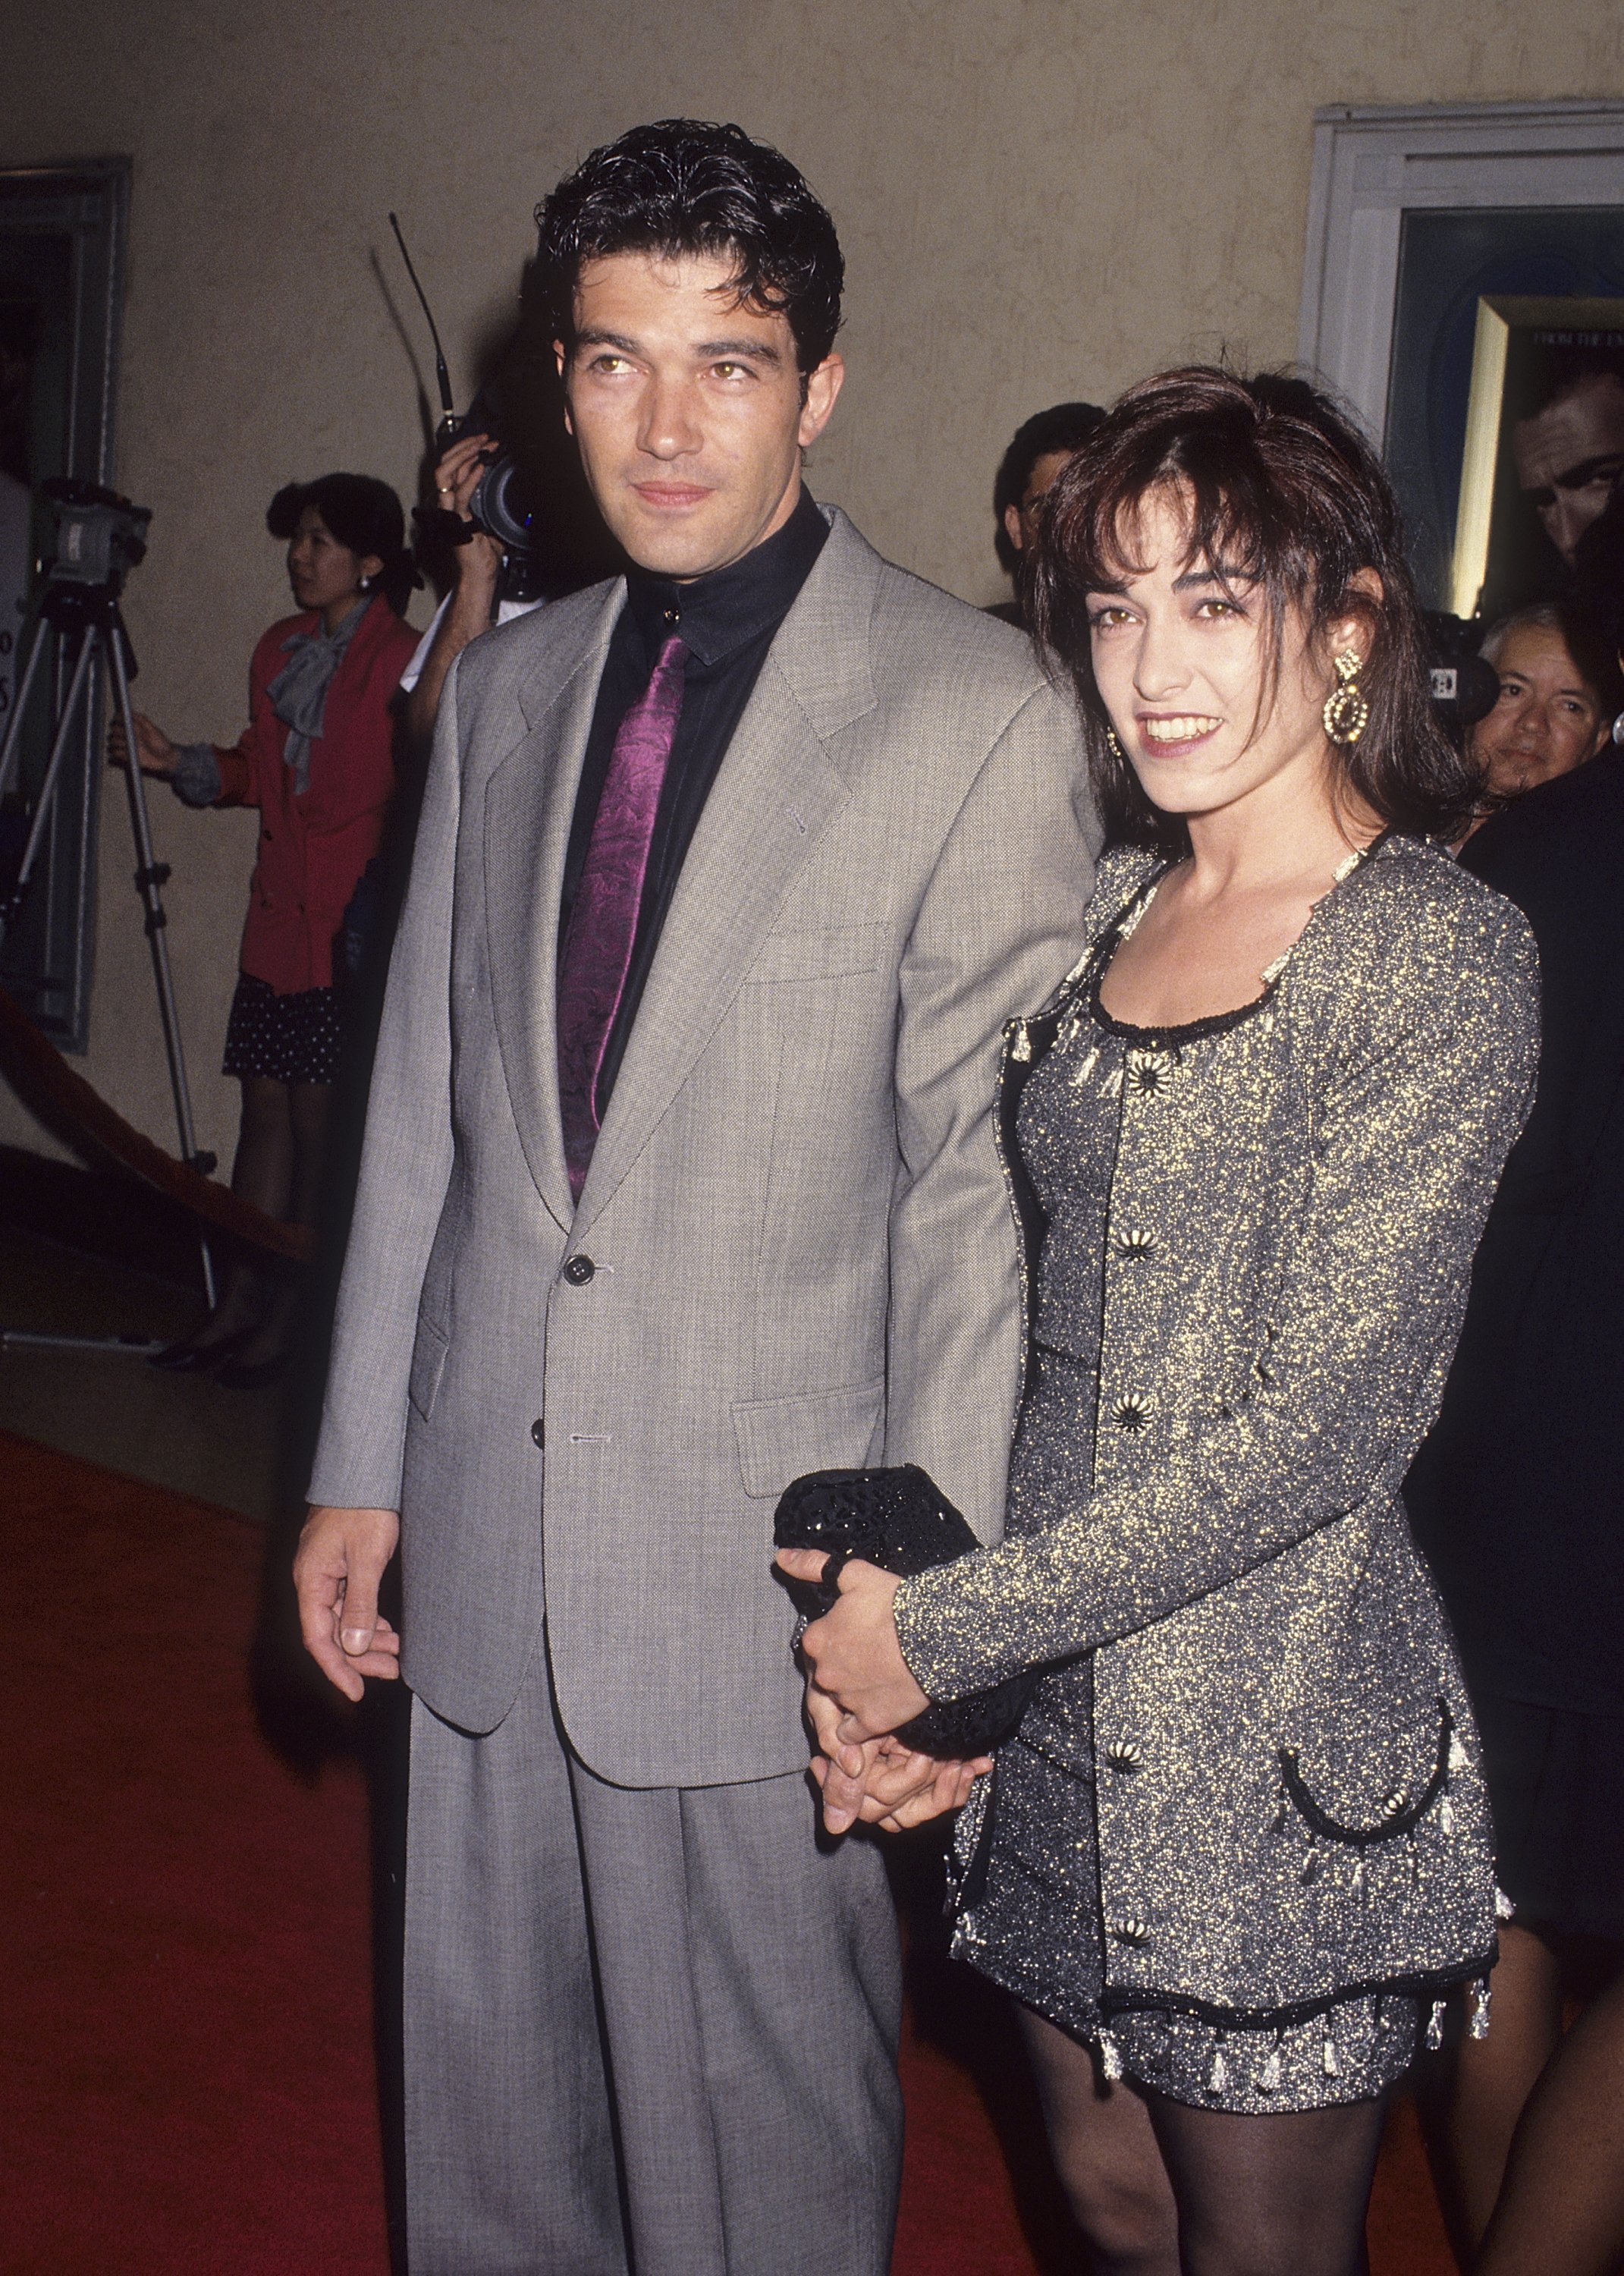 Antonio Banderas and Ana Leza pose on the red carpet at "The Mambo Kings" Westwood Premiere on February 26, 1992, at the Mann Bruin Theatre in Westwood, California | Source: Getty Images